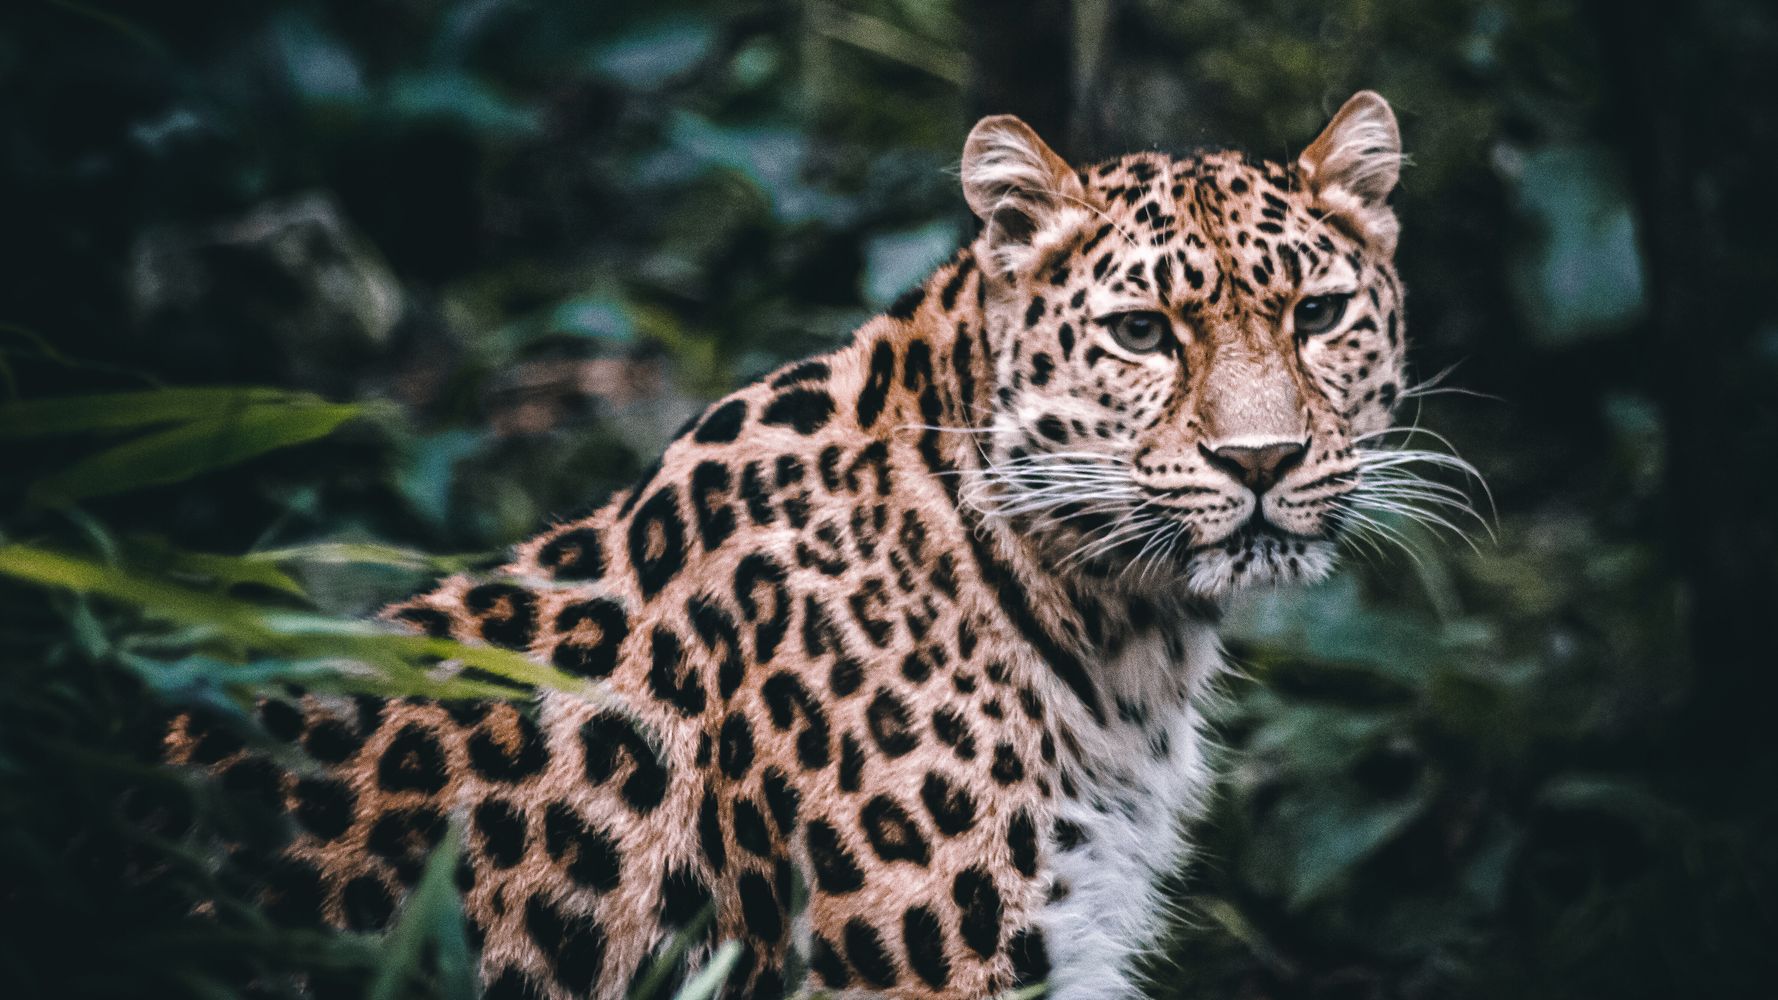 3 Leopards Escaped A Chinese Zoo. The Zoo Didn’t Tell Anyone For Weeks.